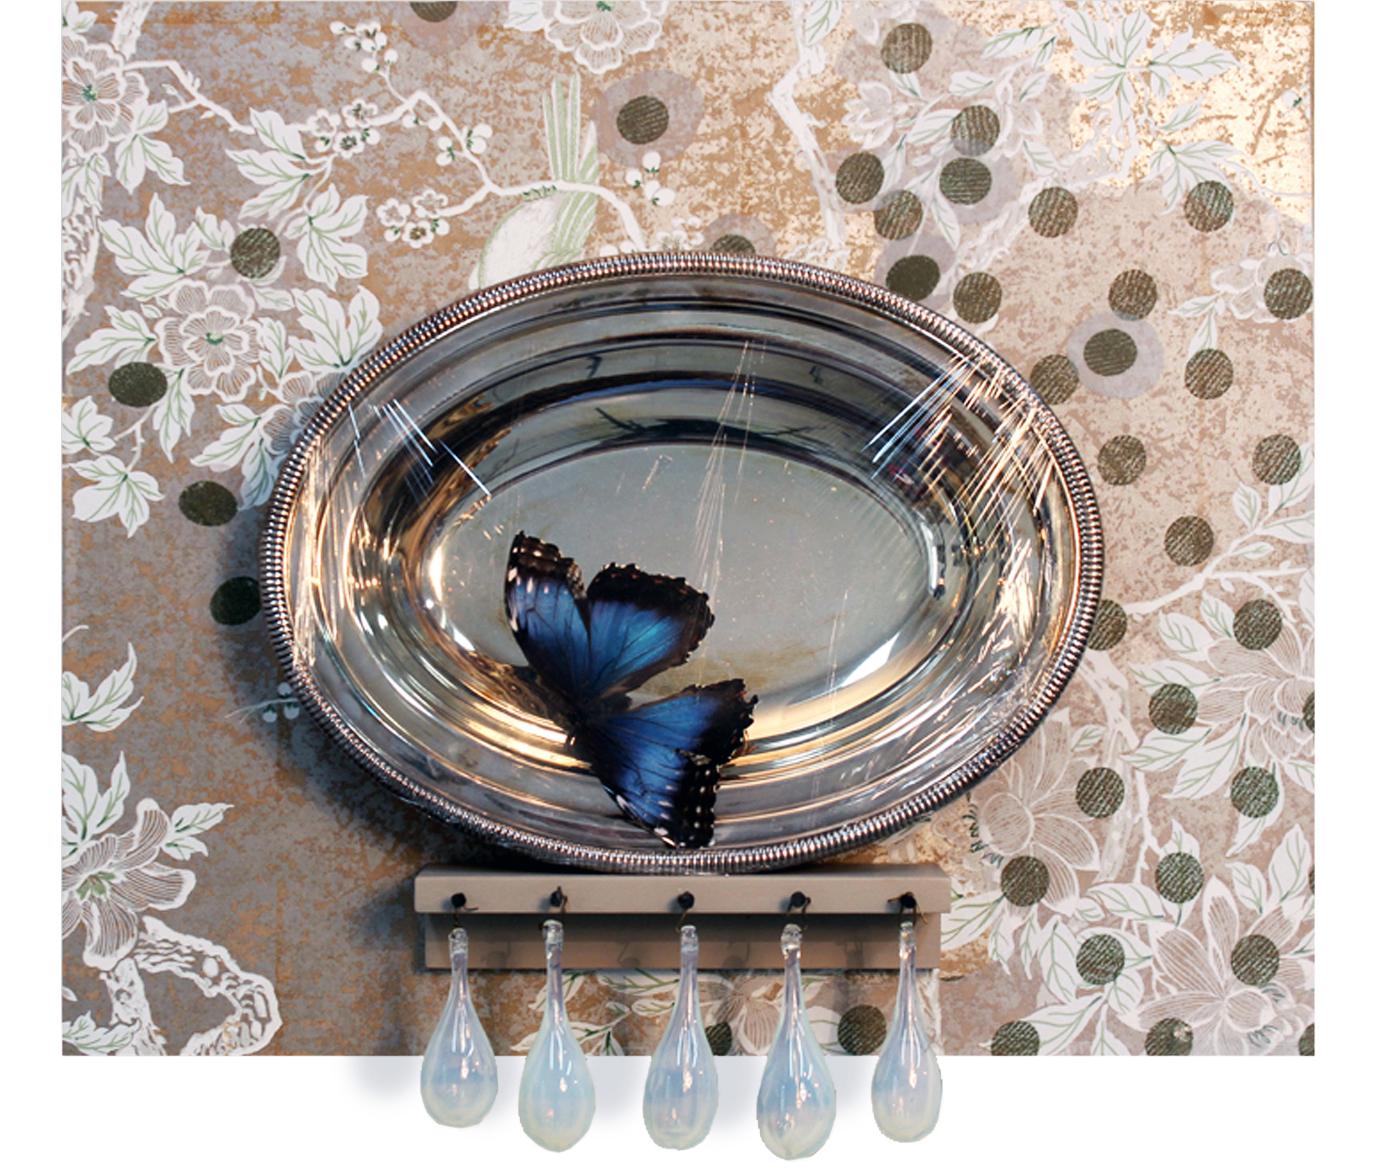 Heather Nicol Still-Life Sculpture - "Parlour", wallpaper, glass, silver platter, butterfly, nails, mounted on board